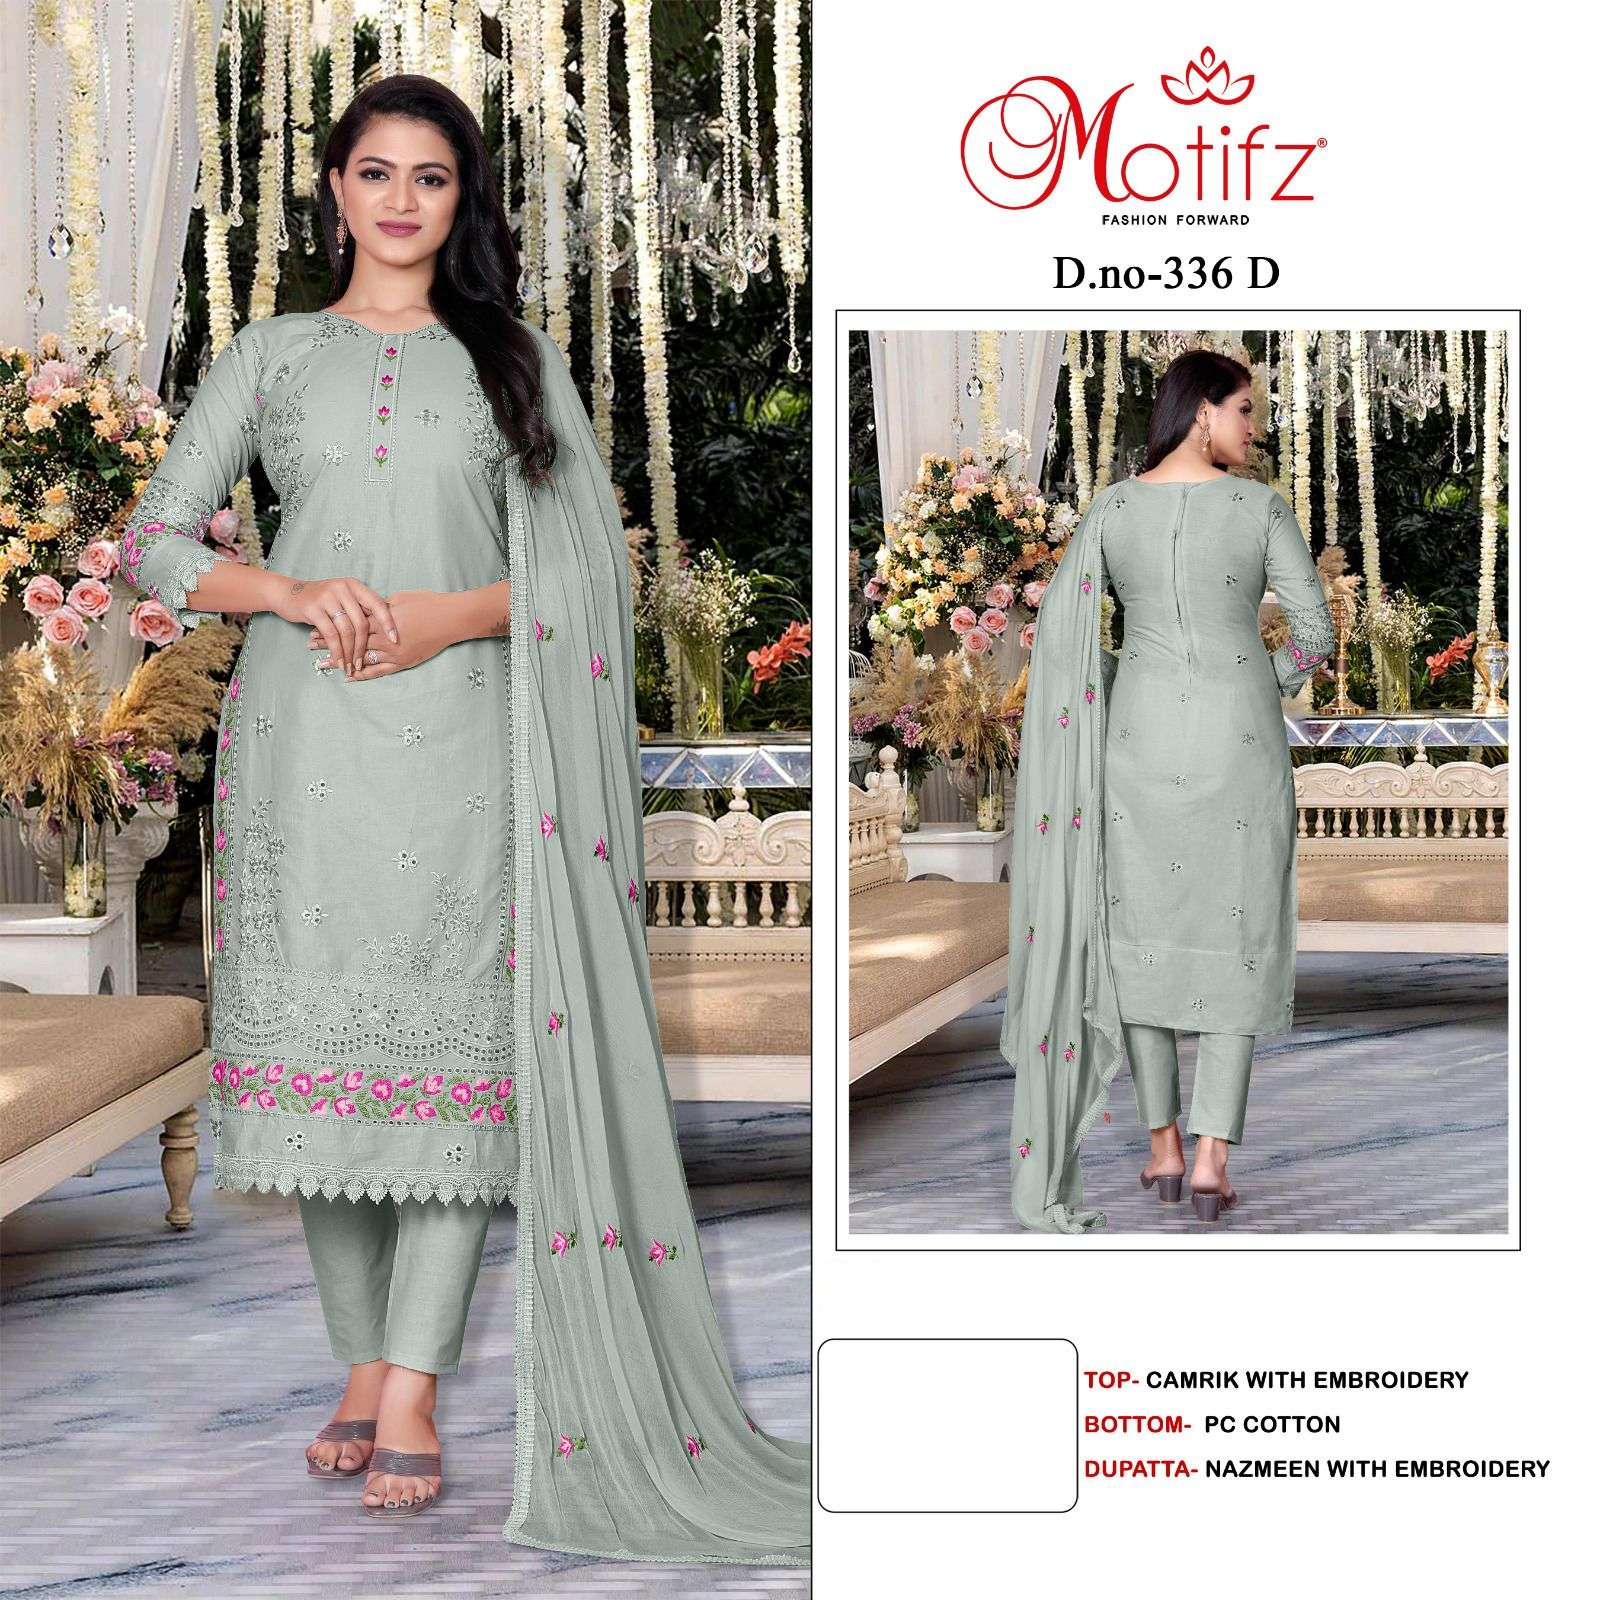 Motifz Hit Design 336 Colours By Motifz 336-A To 336-D Series Beautiful Pakistani Suits Colorful Stylish Fancy Casual Wear & Ethnic Wear Cambric Embroidered Dresses At Wholesale Price